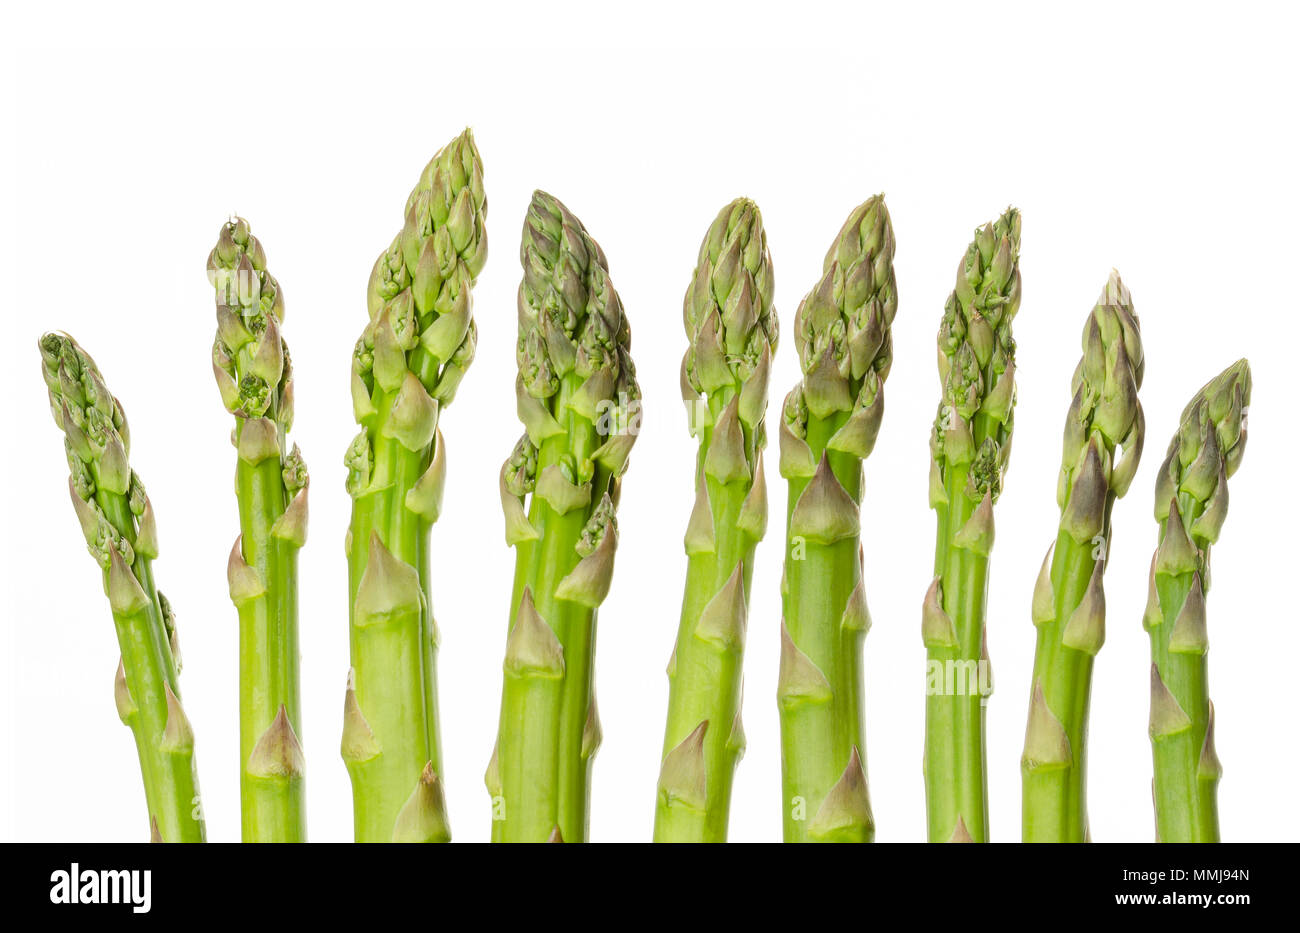 Fresh green asparagus tips in a row. Sparrow grass. Cultivated Asparagus officinalis. Spring vegetable with thick stems and closed buds. Food photo. Stock Photo